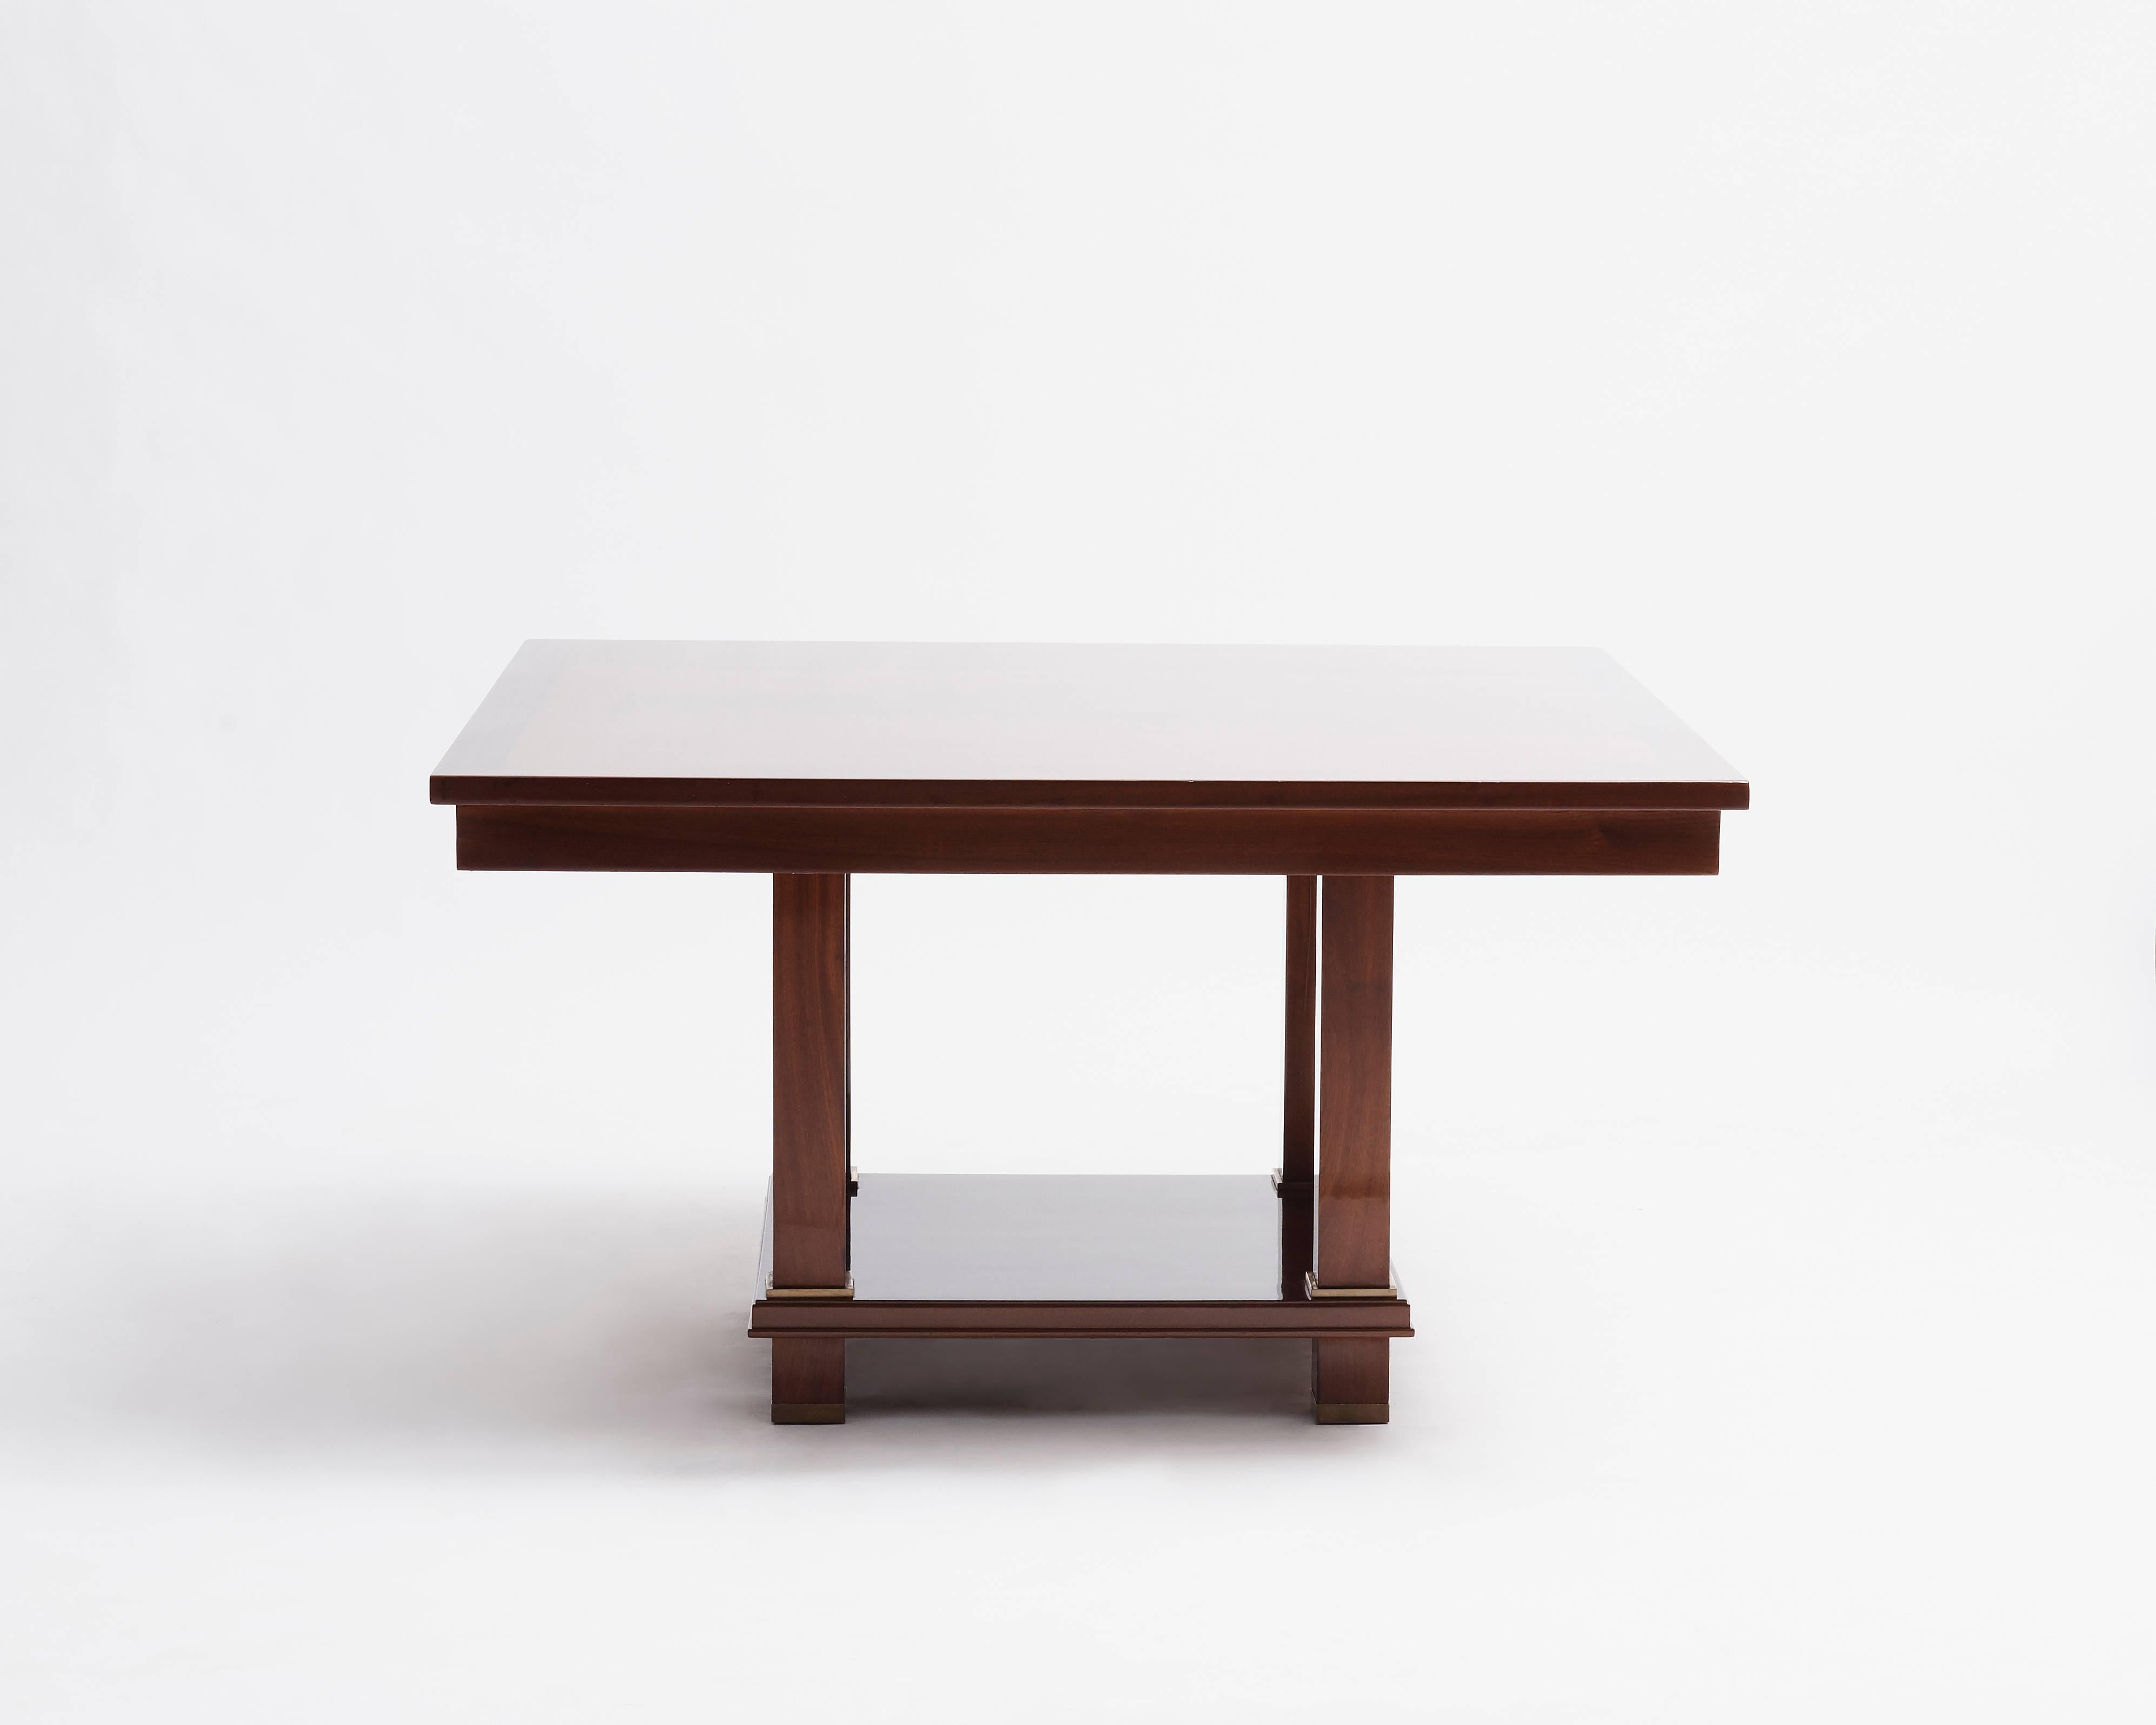 This table was part of a project Jacques Adnet undertook with fellow designer André Arbus to redecorate the Palais des Consuls de Rouen in 1955.